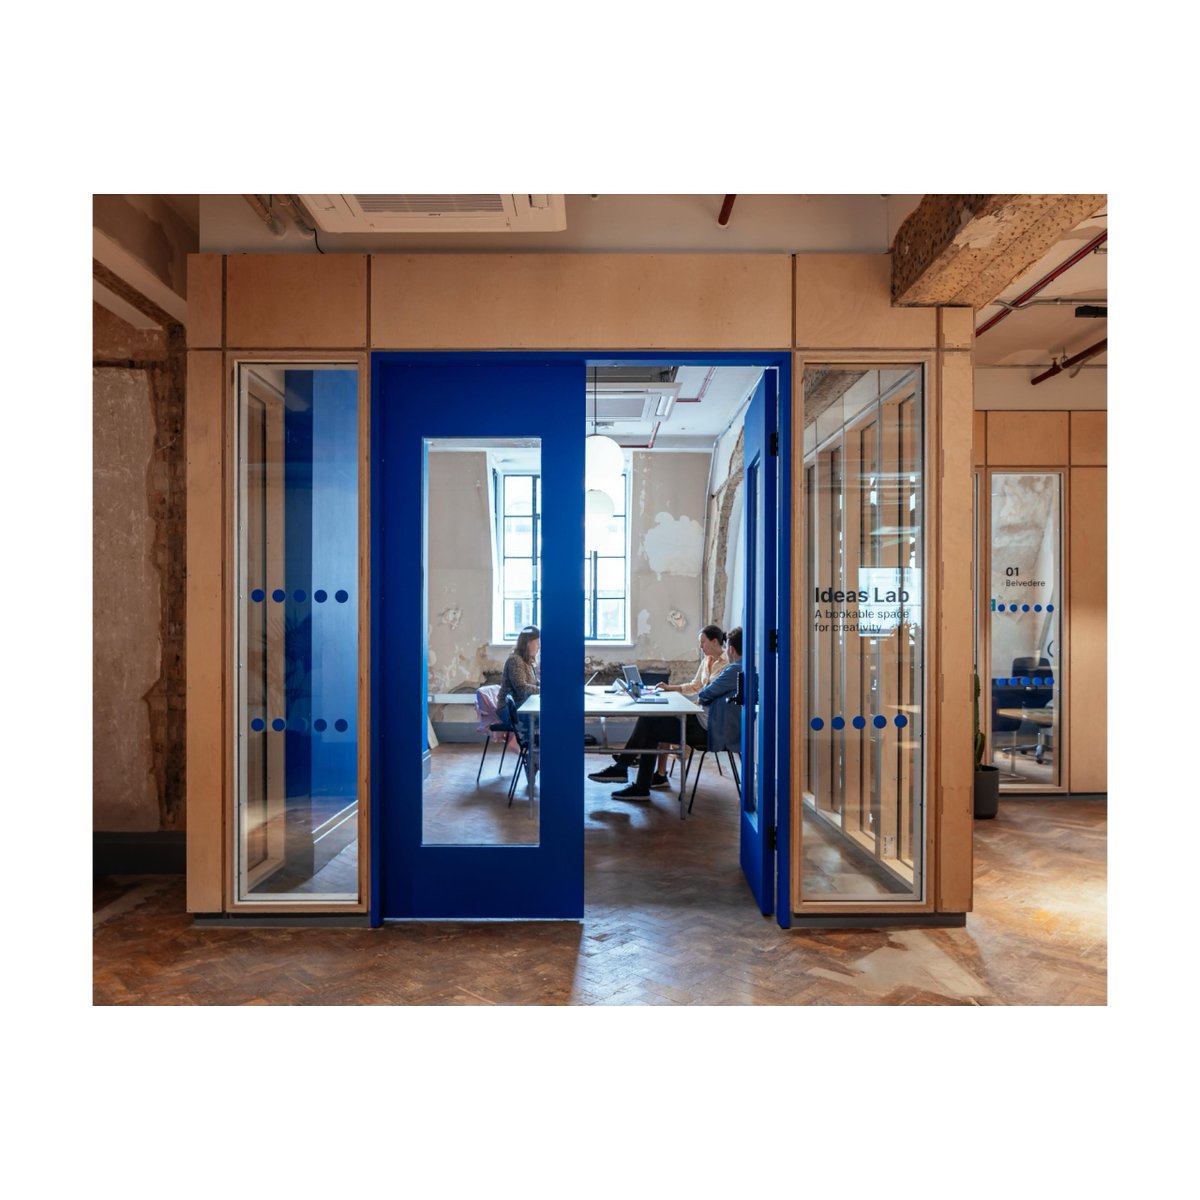 Reduce, reuse, recycle. U-Build completed a project at County Hall & moved office partitions from the 3rd floor to the 5th floor, successfully reusing most of the previous modular components. Well done U-Build 👏

#wearebluepatch #netzerojourney #commercialbuilding